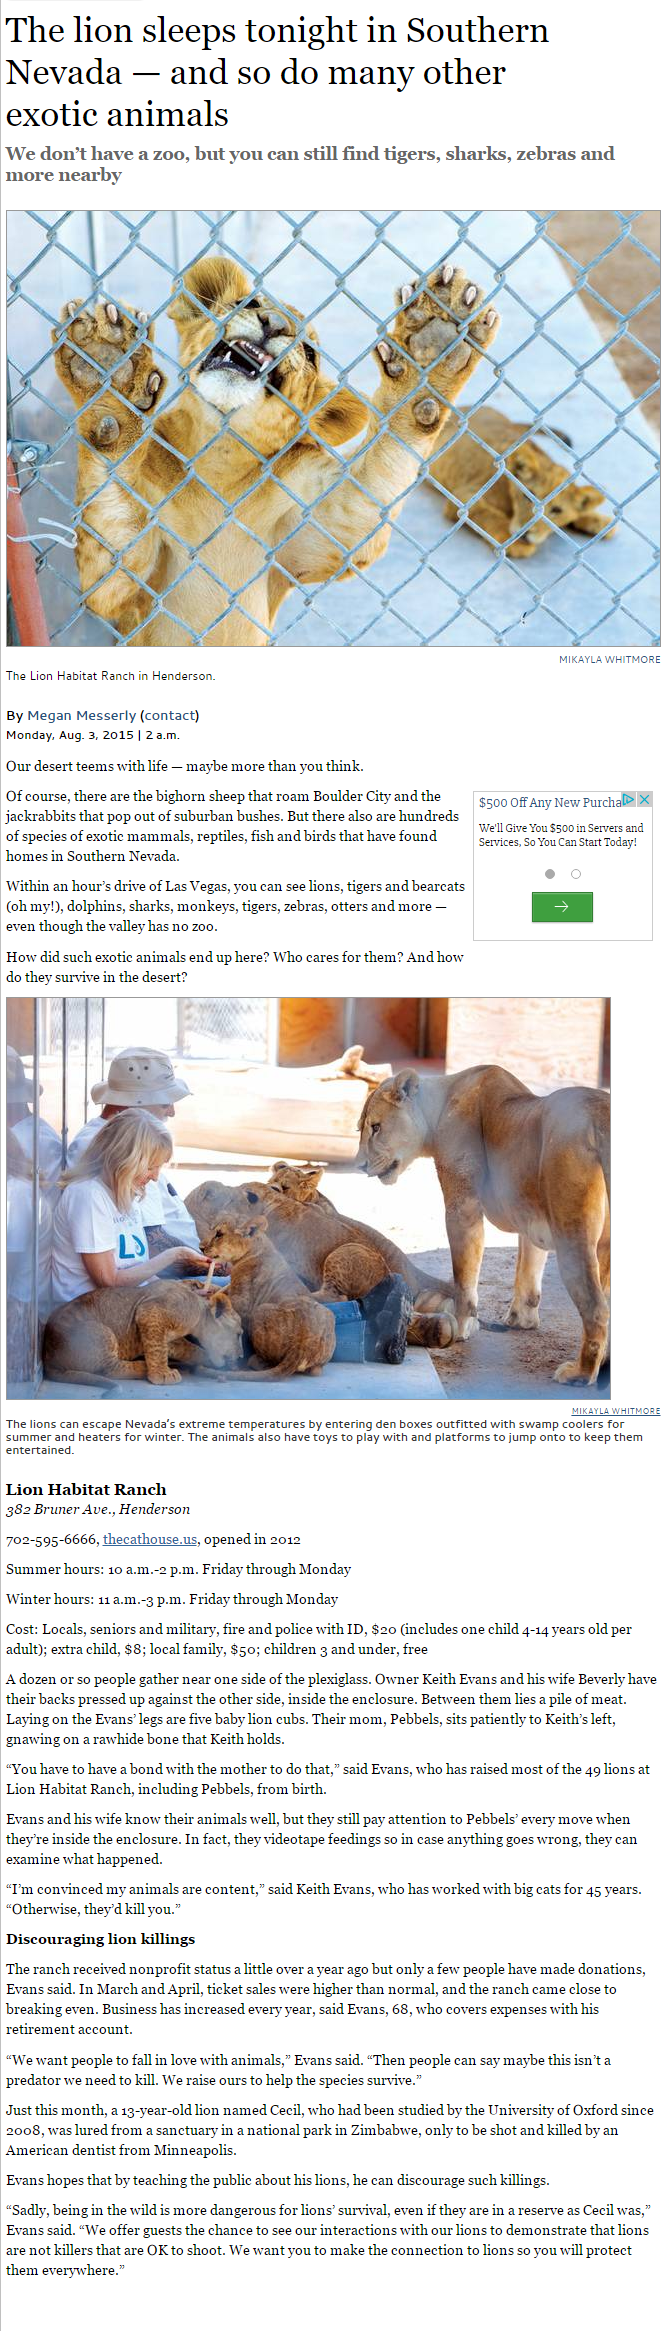 The lion sleeps tonight in Southern Nevada — and so do many other exotic animals - Las Vegas Sun News.clipular (1)